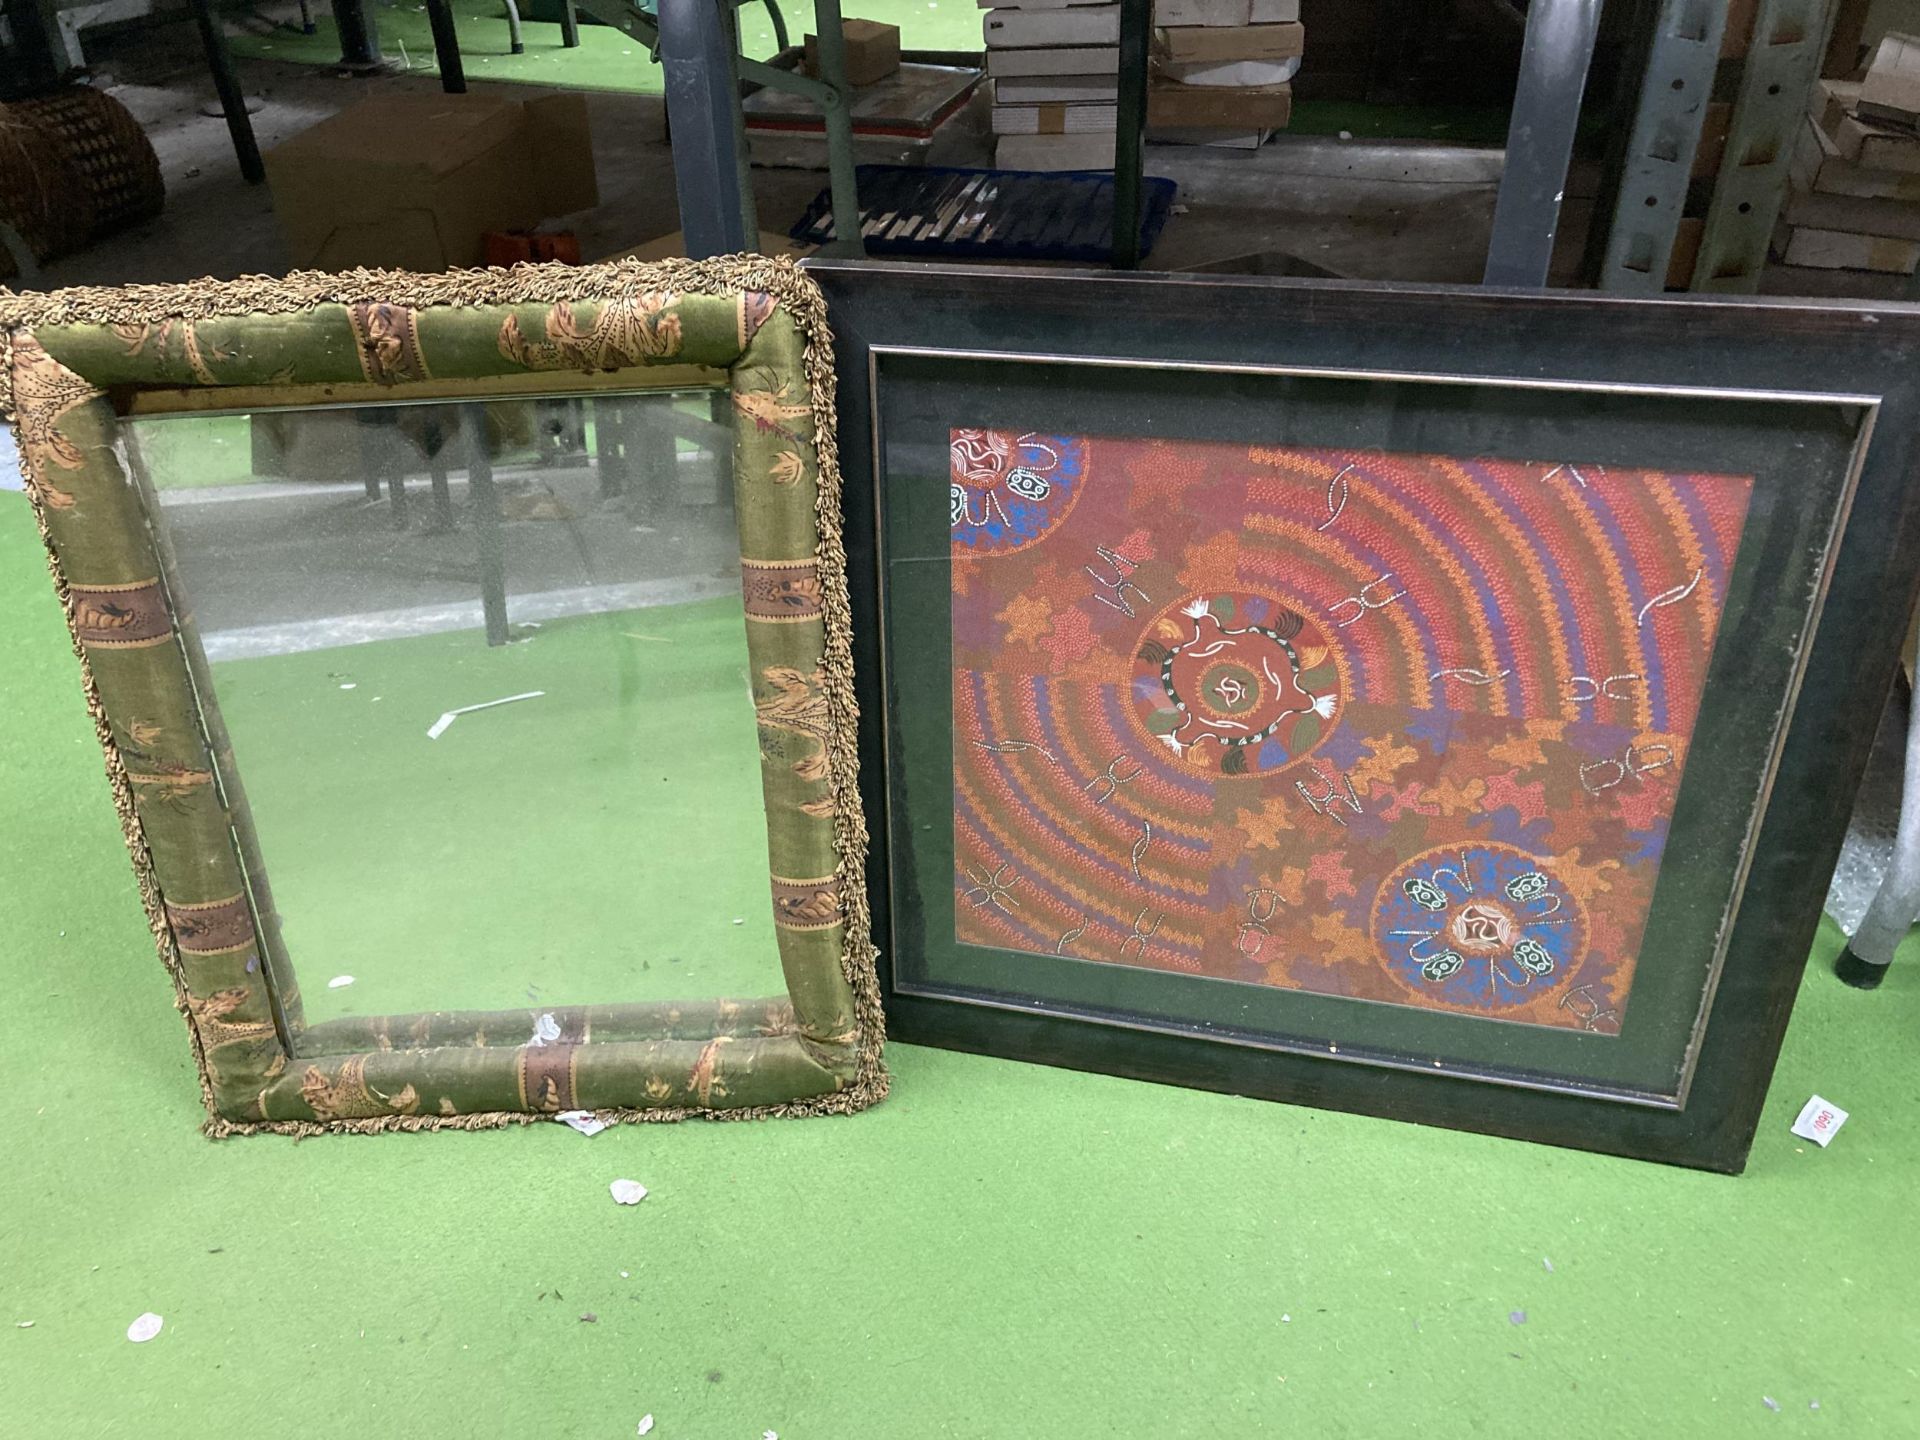 TWO FRAMED ITEMS - SILK EFFECT FRAMED MIRROR AND TAPESTRY